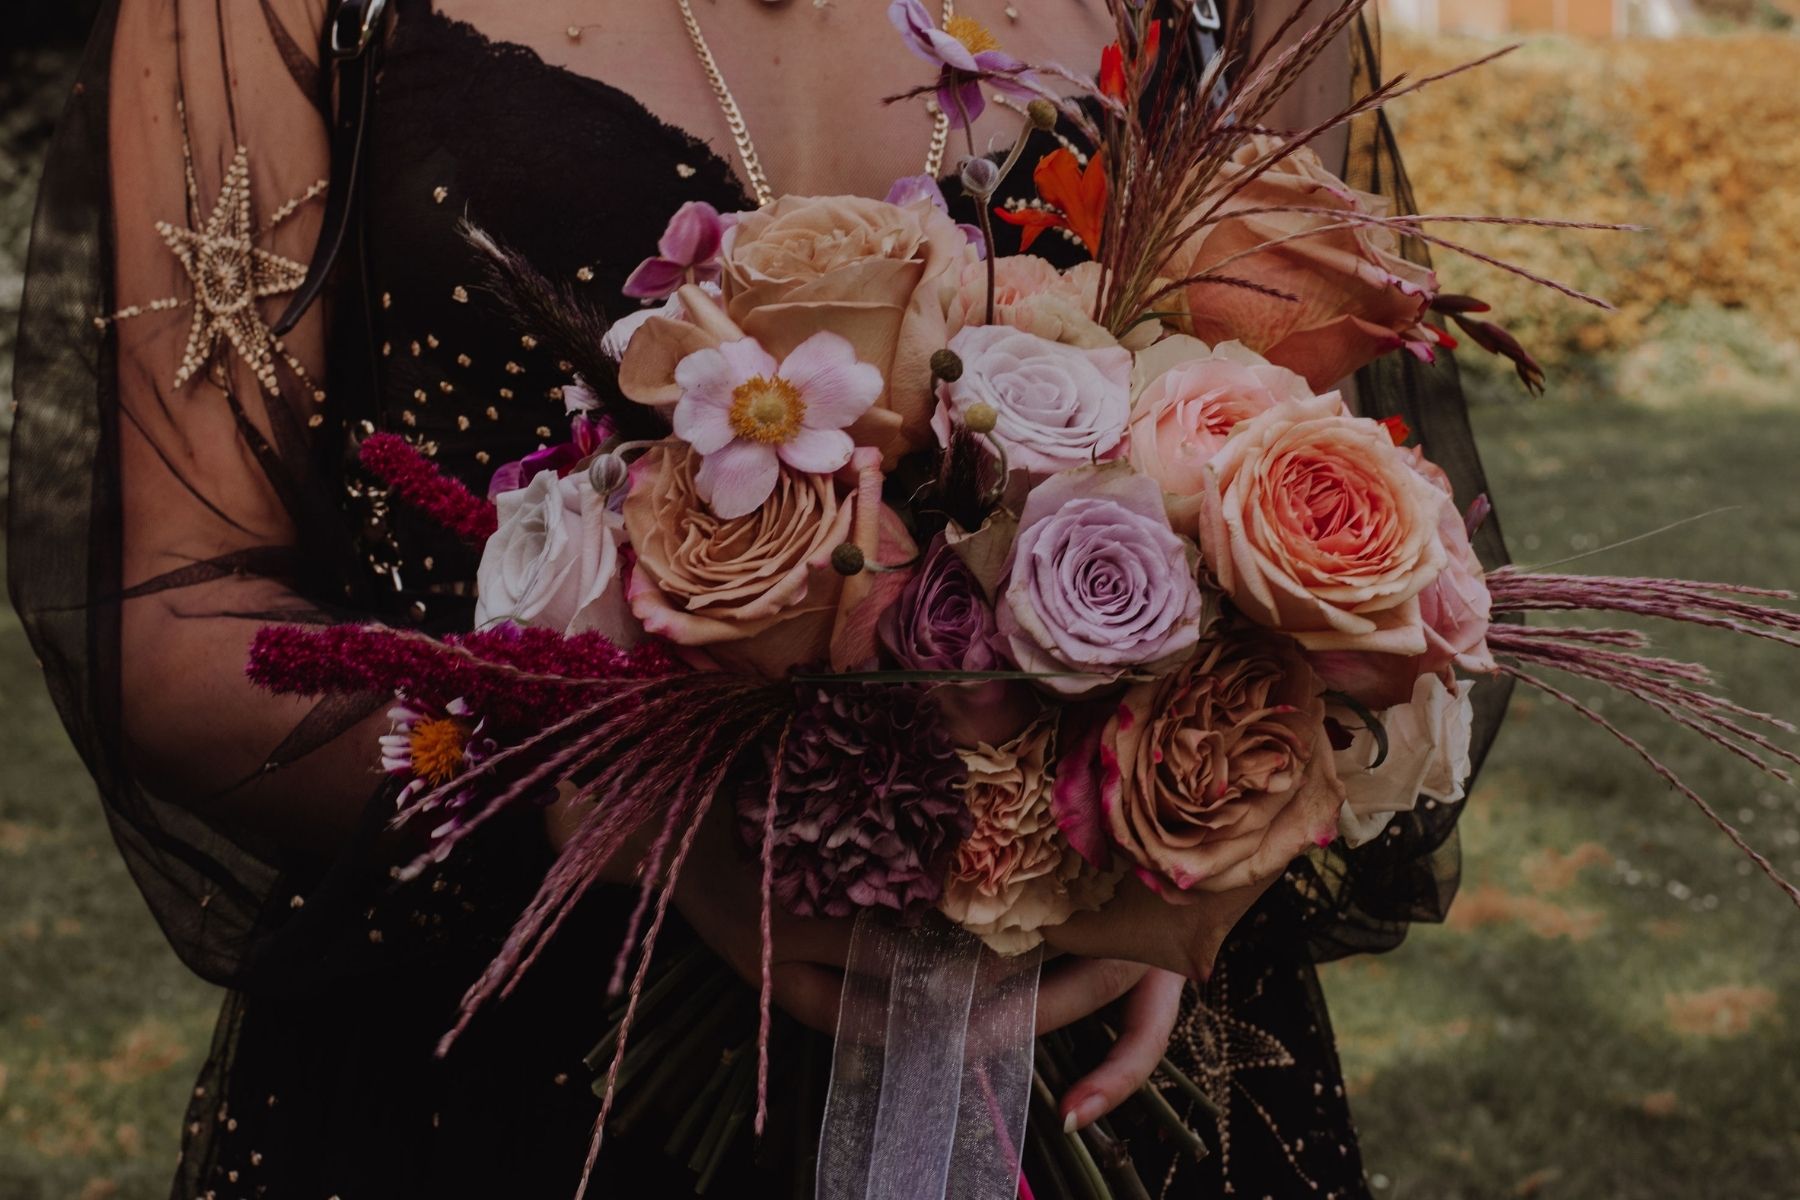 Inspirational Shoot With Gorgeous Decofresh Roses and Carnations - Blog on Thursd (6)